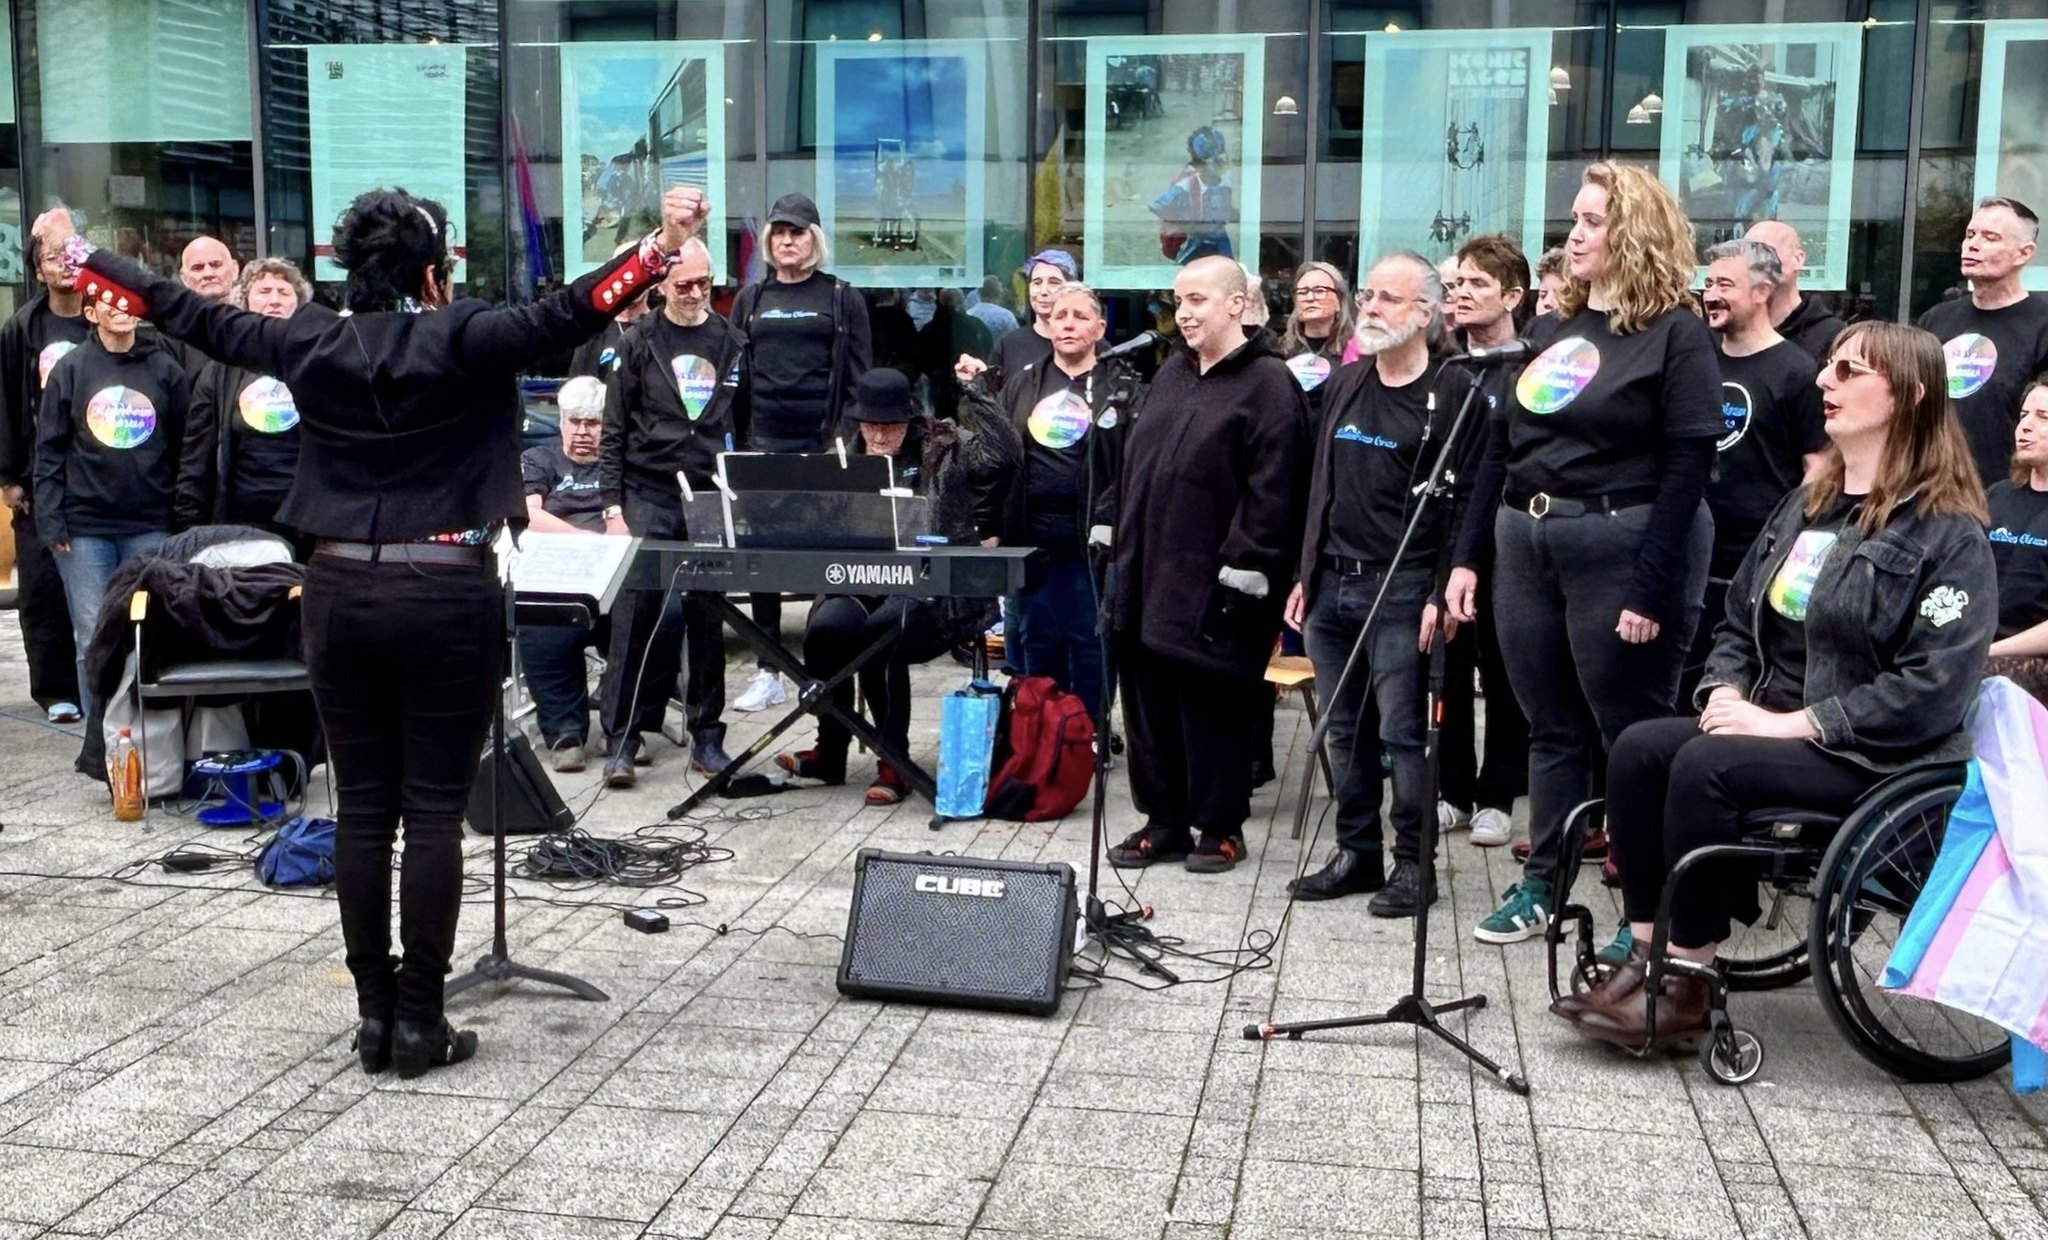 “Come along and help make some noise with us!” Brighton’s Rainbow Chorus to perform at IDAHOBIT Community Vigil on 17 May